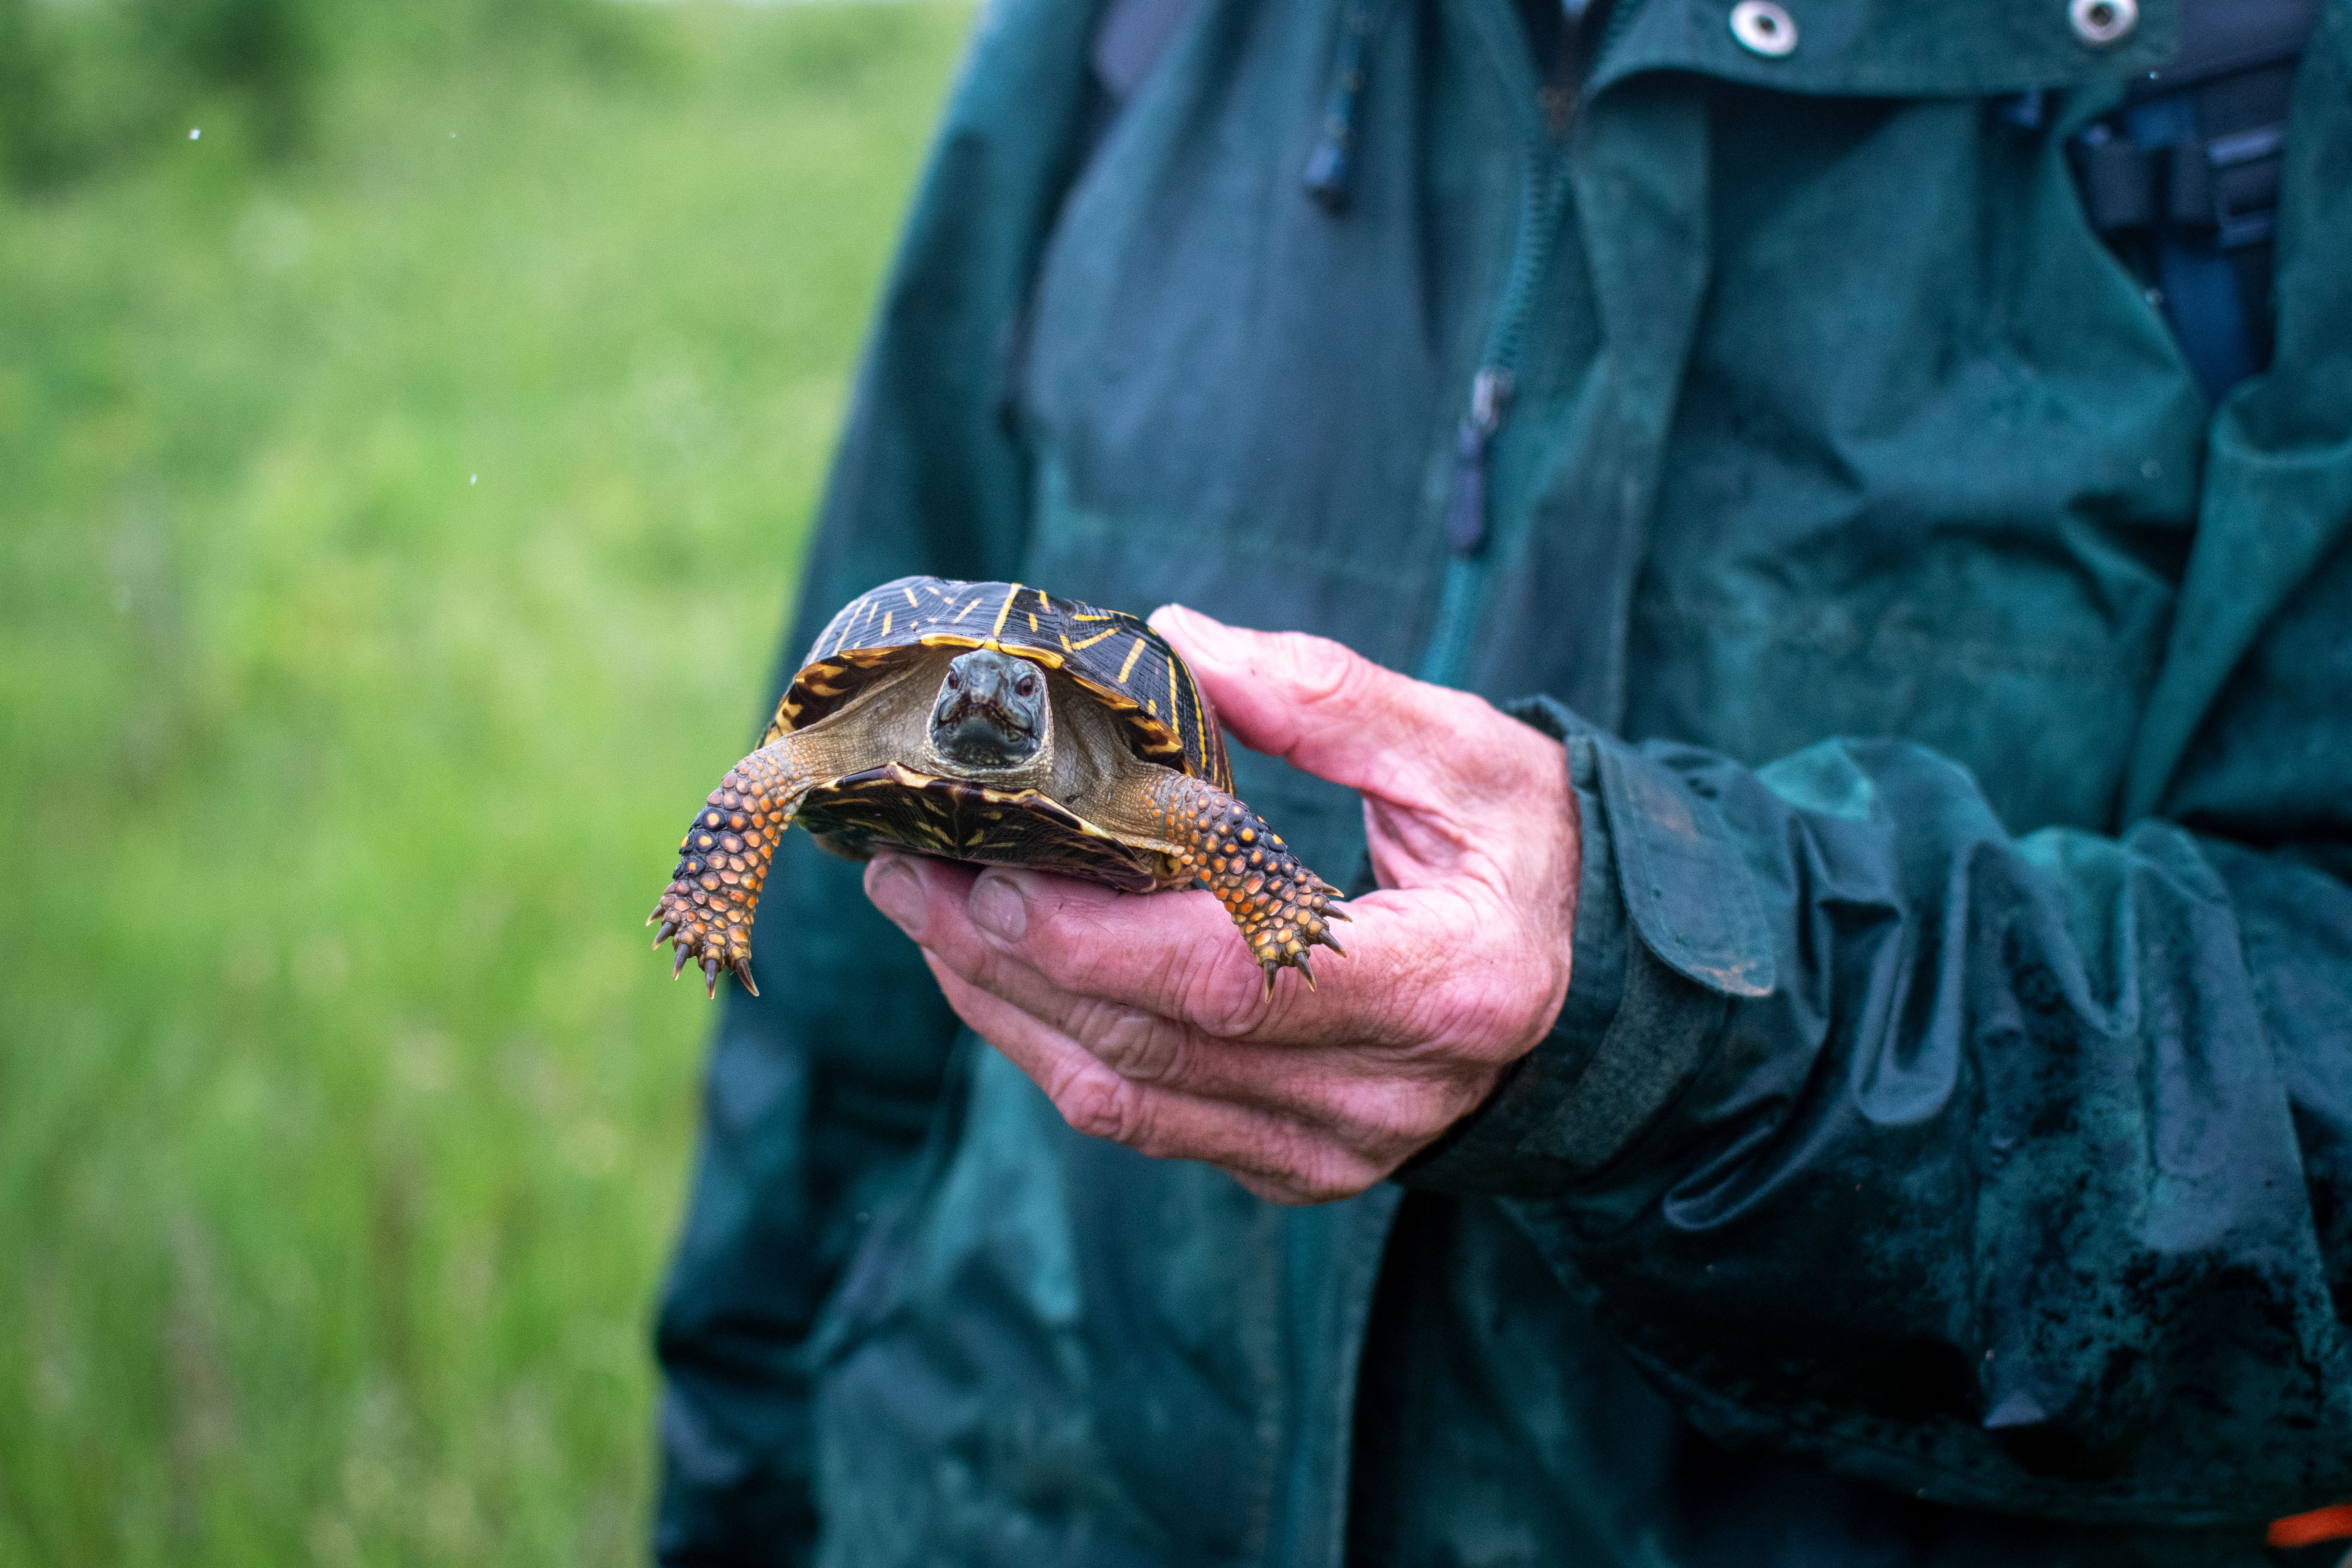 A person holding an ornate box turtle.